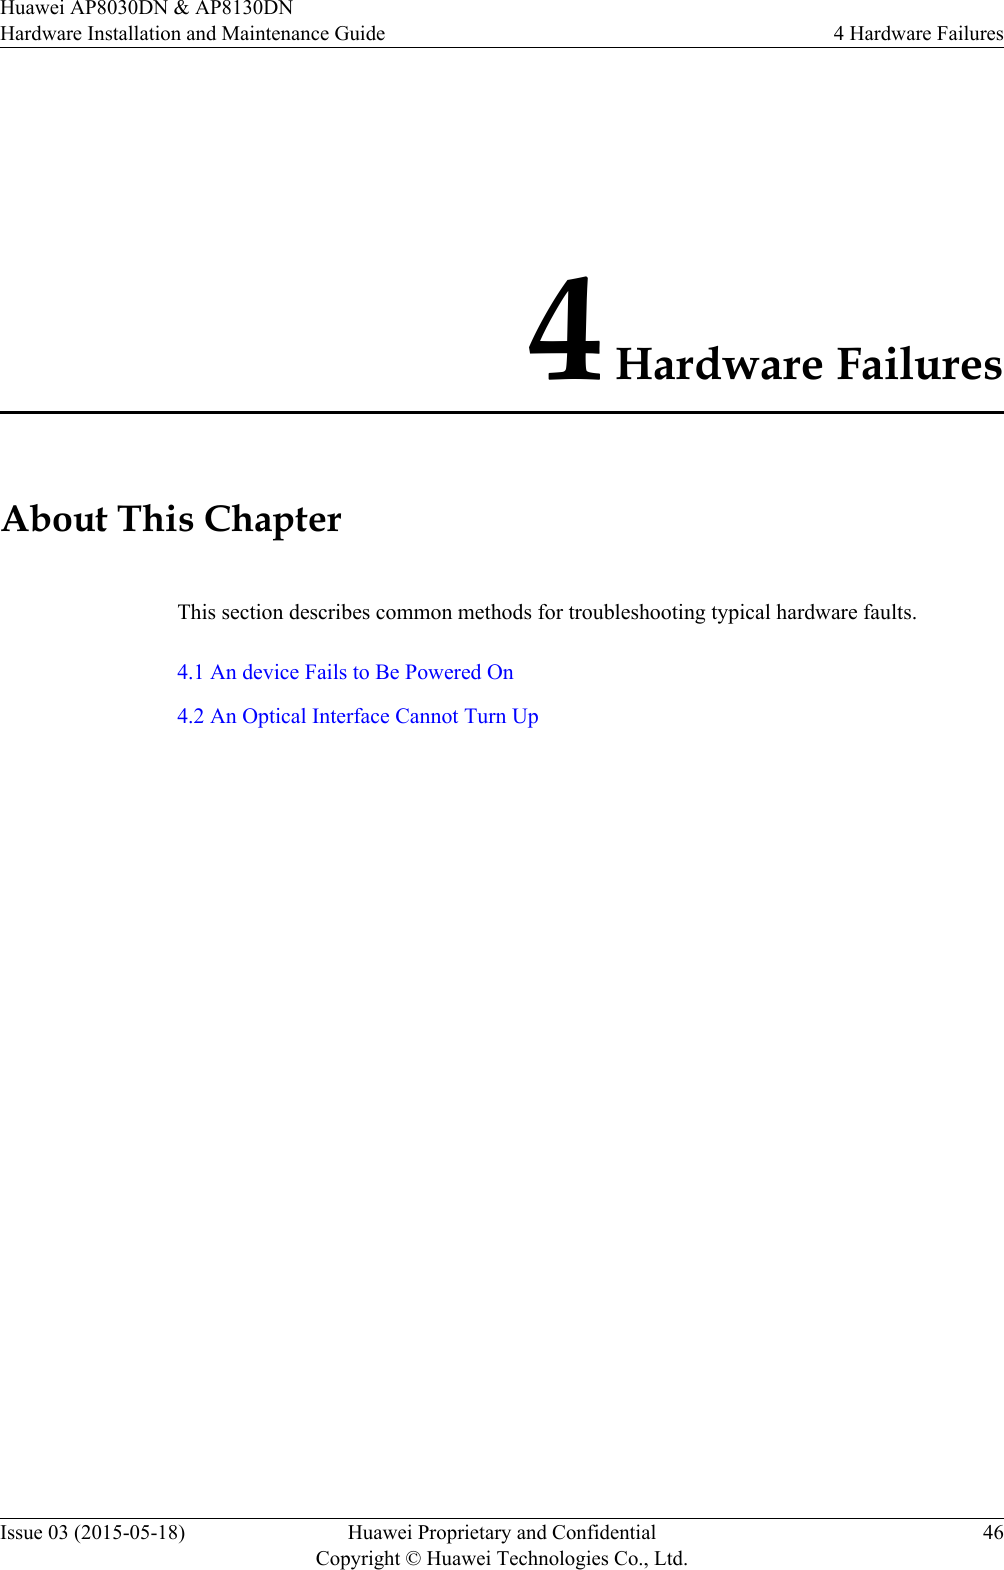 4 Hardware FailuresAbout This ChapterThis section describes common methods for troubleshooting typical hardware faults.4.1 An device Fails to Be Powered On4.2 An Optical Interface Cannot Turn UpHuawei AP8030DN &amp; AP8130DNHardware Installation and Maintenance Guide 4 Hardware FailuresIssue 03 (2015-05-18) Huawei Proprietary and ConfidentialCopyright © Huawei Technologies Co., Ltd.46